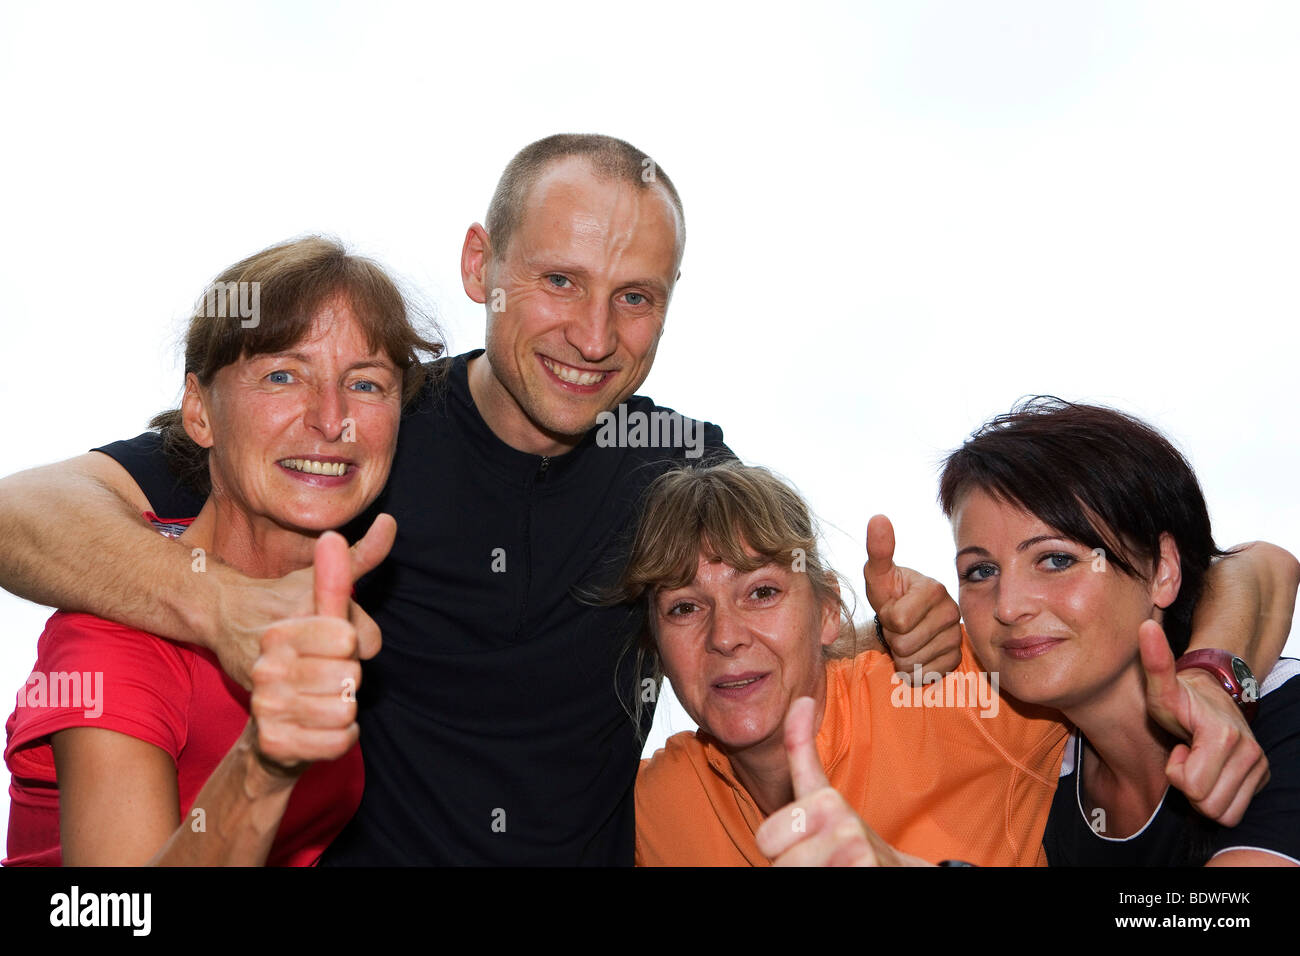 Team of four athletes, thumbs up Stock Photo